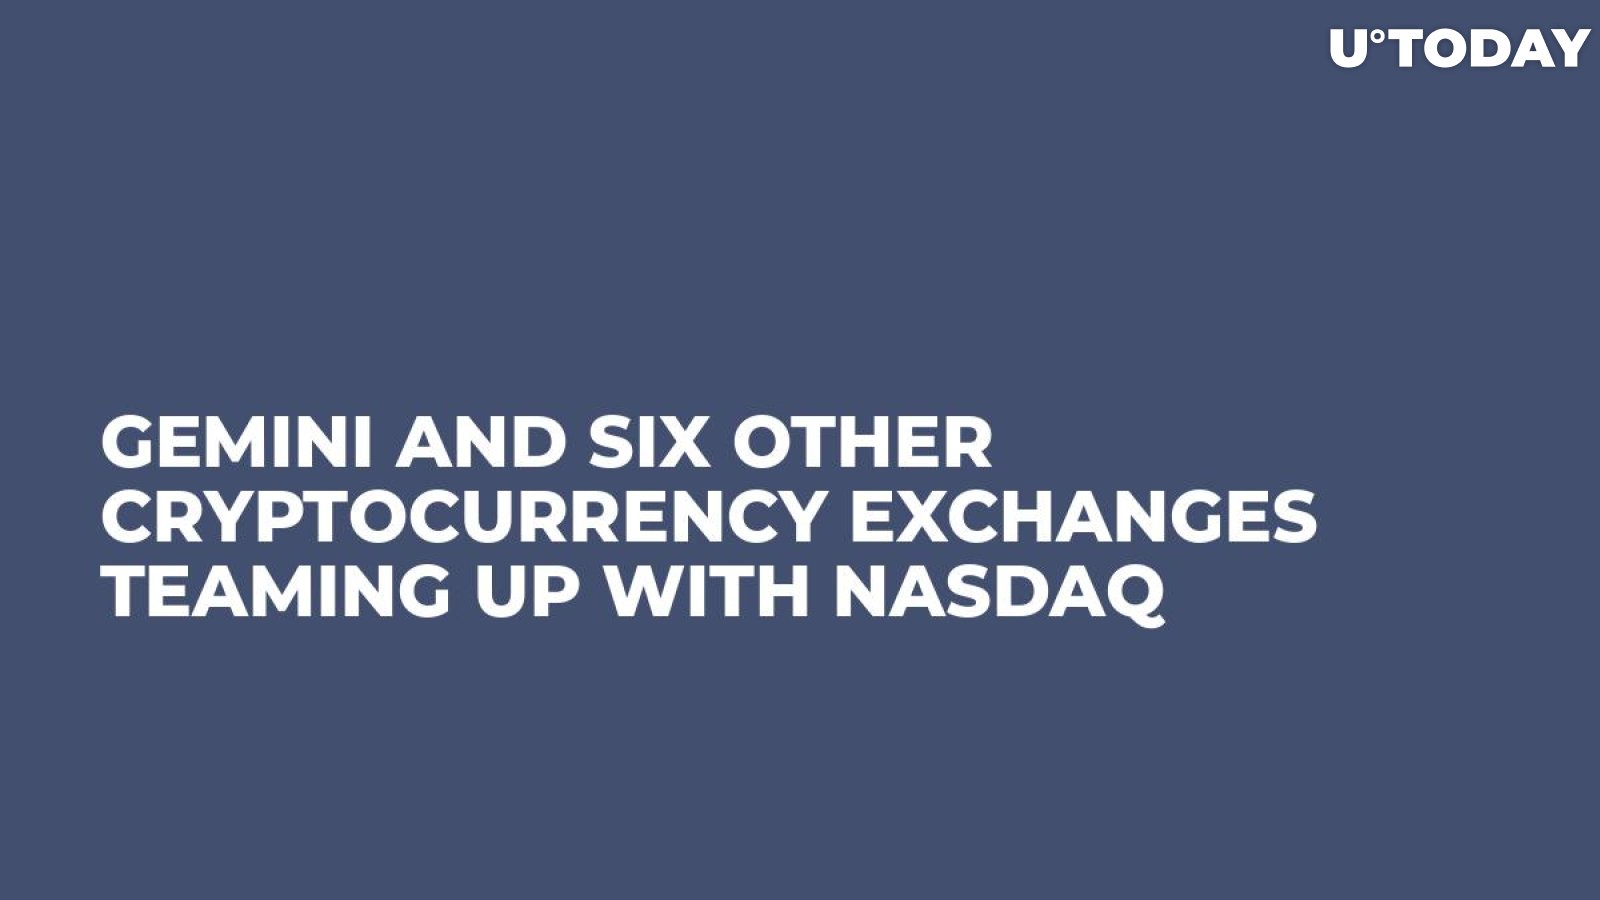 Gemini and Six Other Cryptocurrency Exchanges Teaming Up with Nasdaq